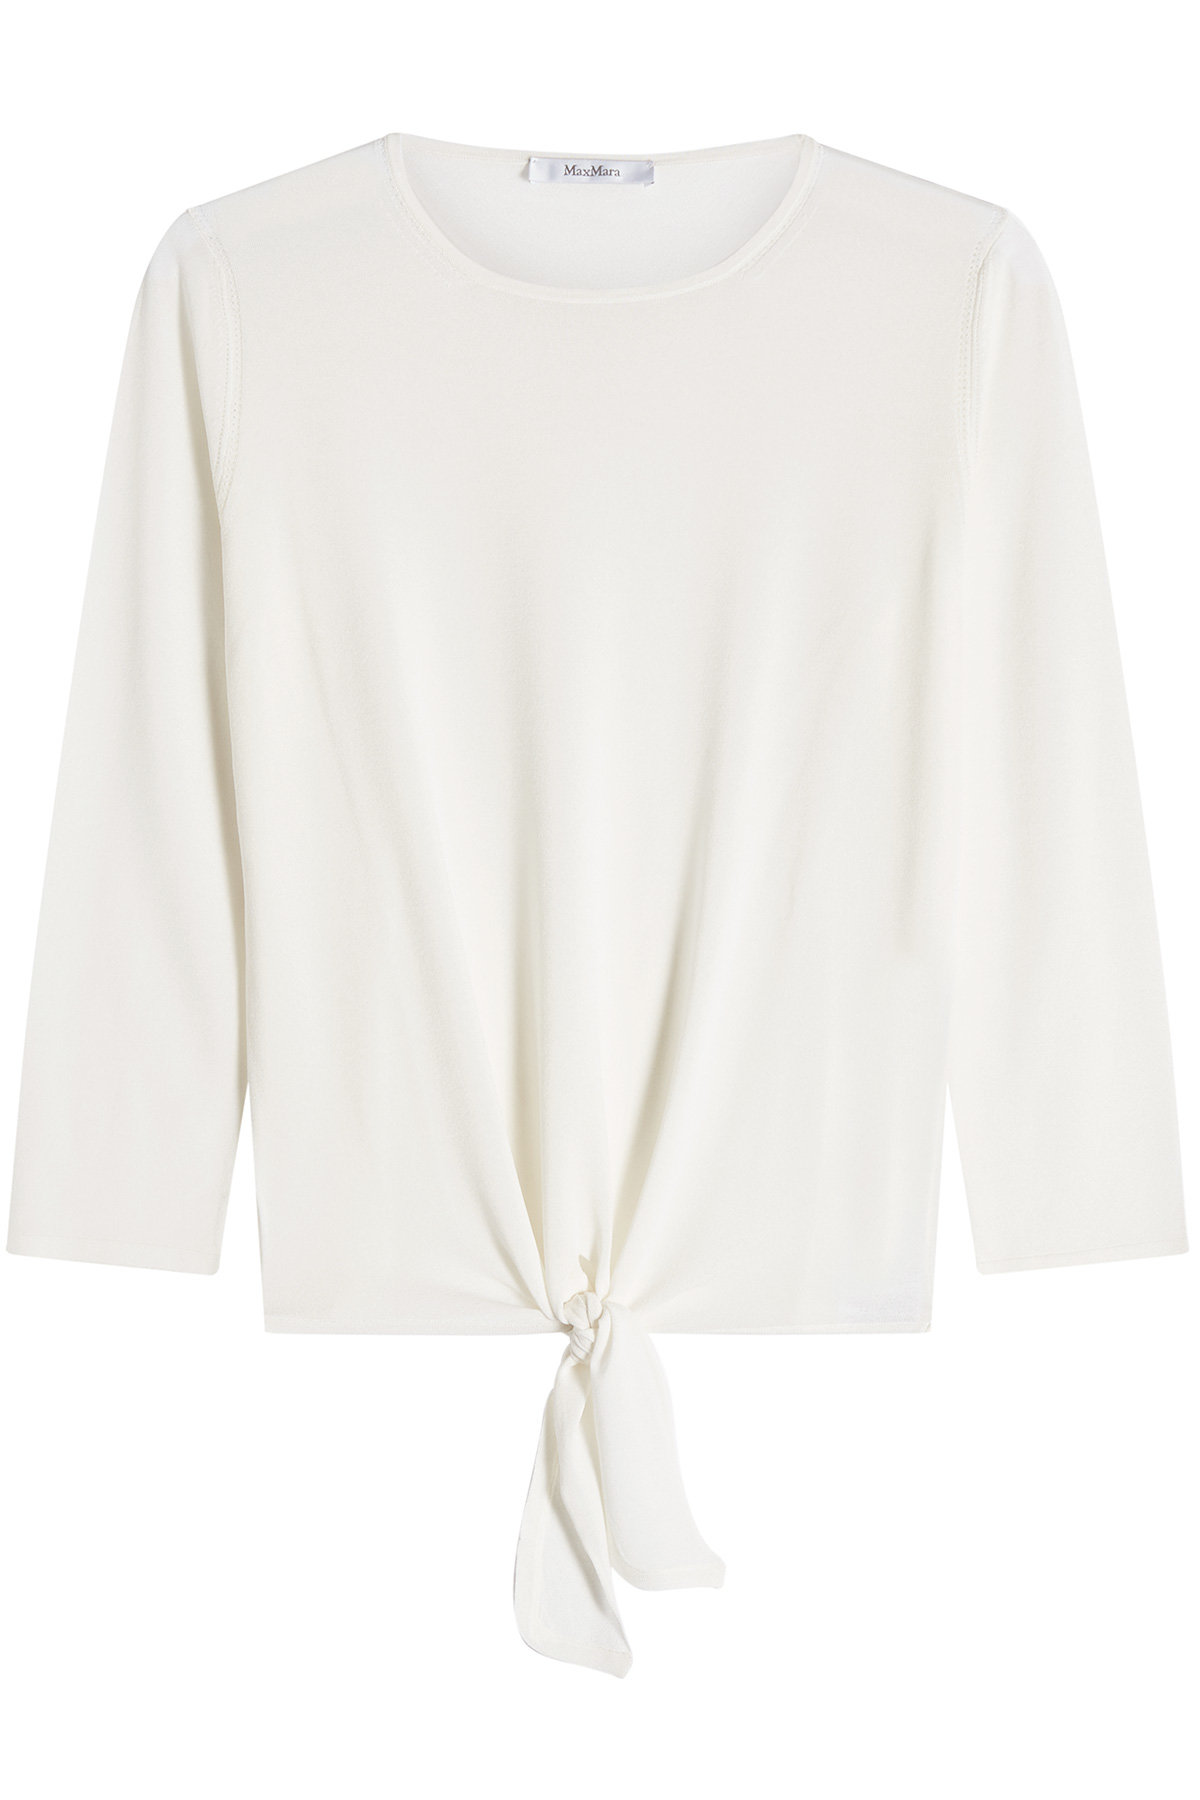 Max Mara - Top with Knotted Front